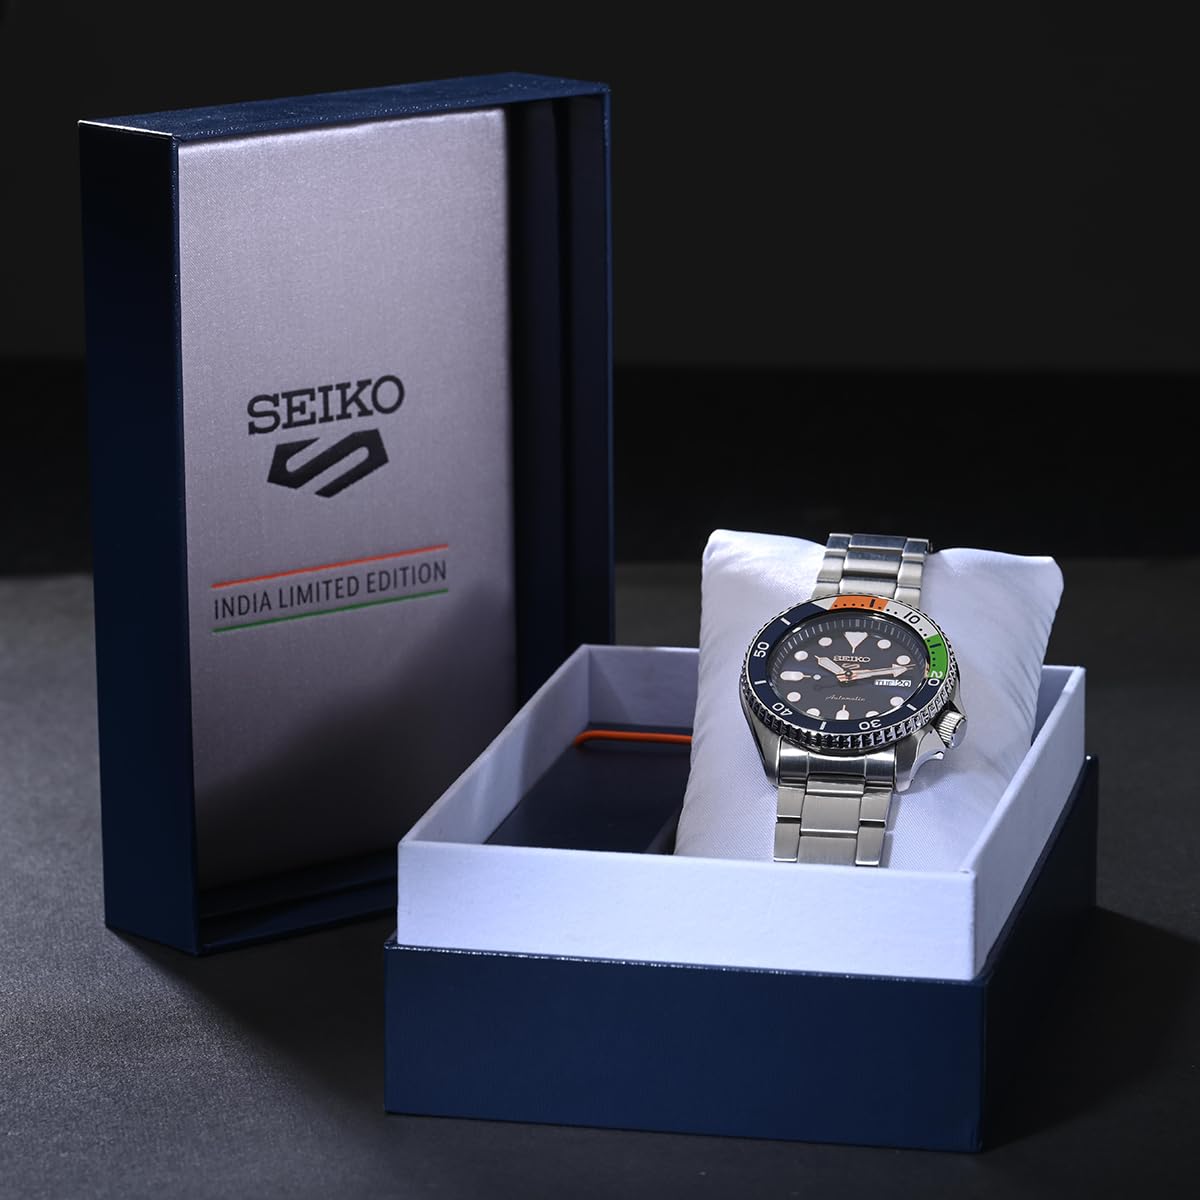 Seiko Limited Edition India Exclusive Blue Dial Men's Watch, Stainless Steel Band, with Extra Silicon Strap